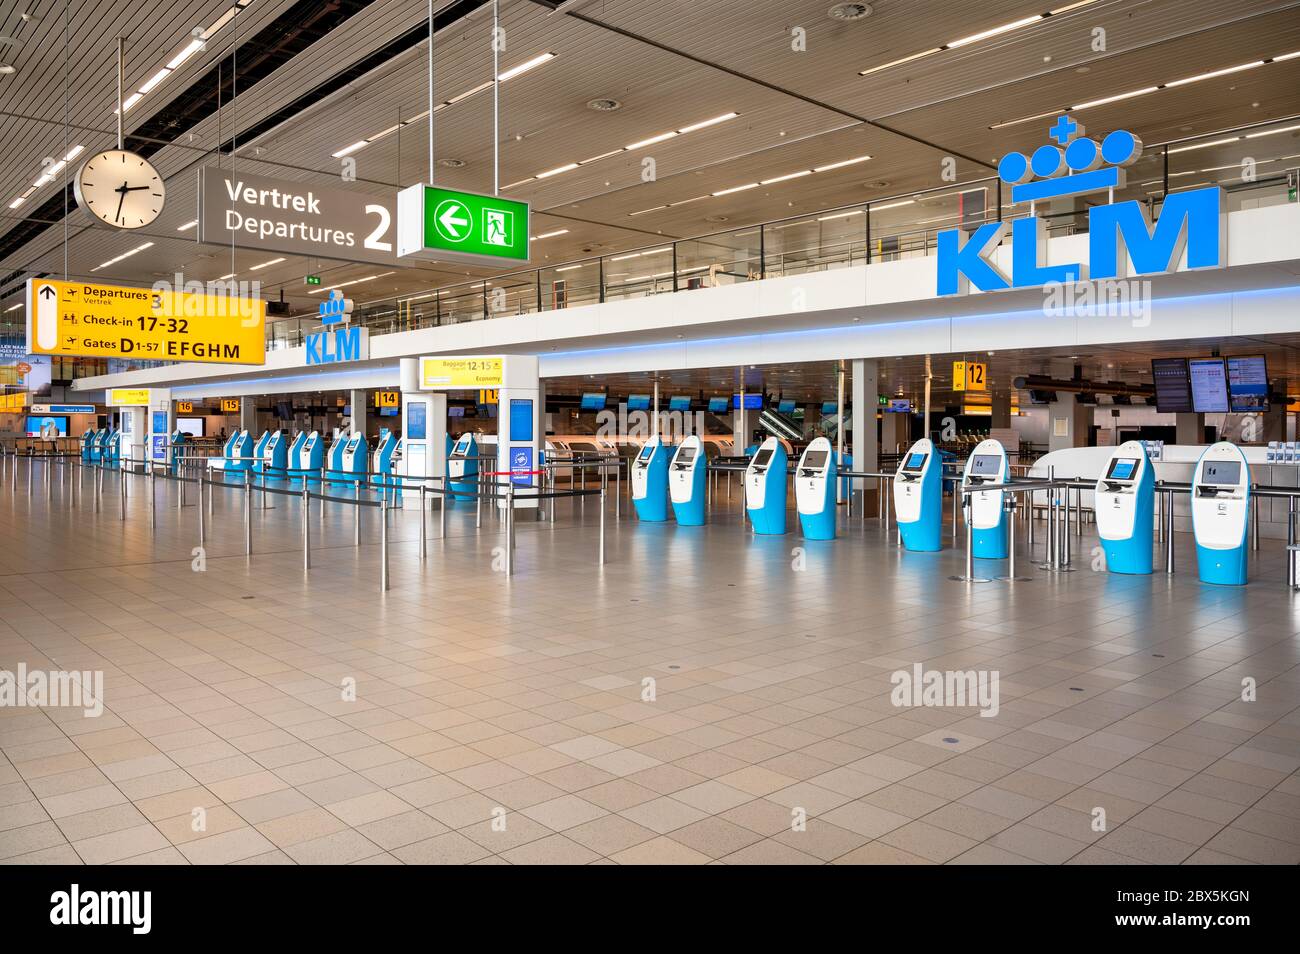 Amsterdam, Netherlands. 03 June 2020. Empty KLM check-in area Schiphol Amsterdam International Airport during Covid-19 travel restrictions Stock Photo